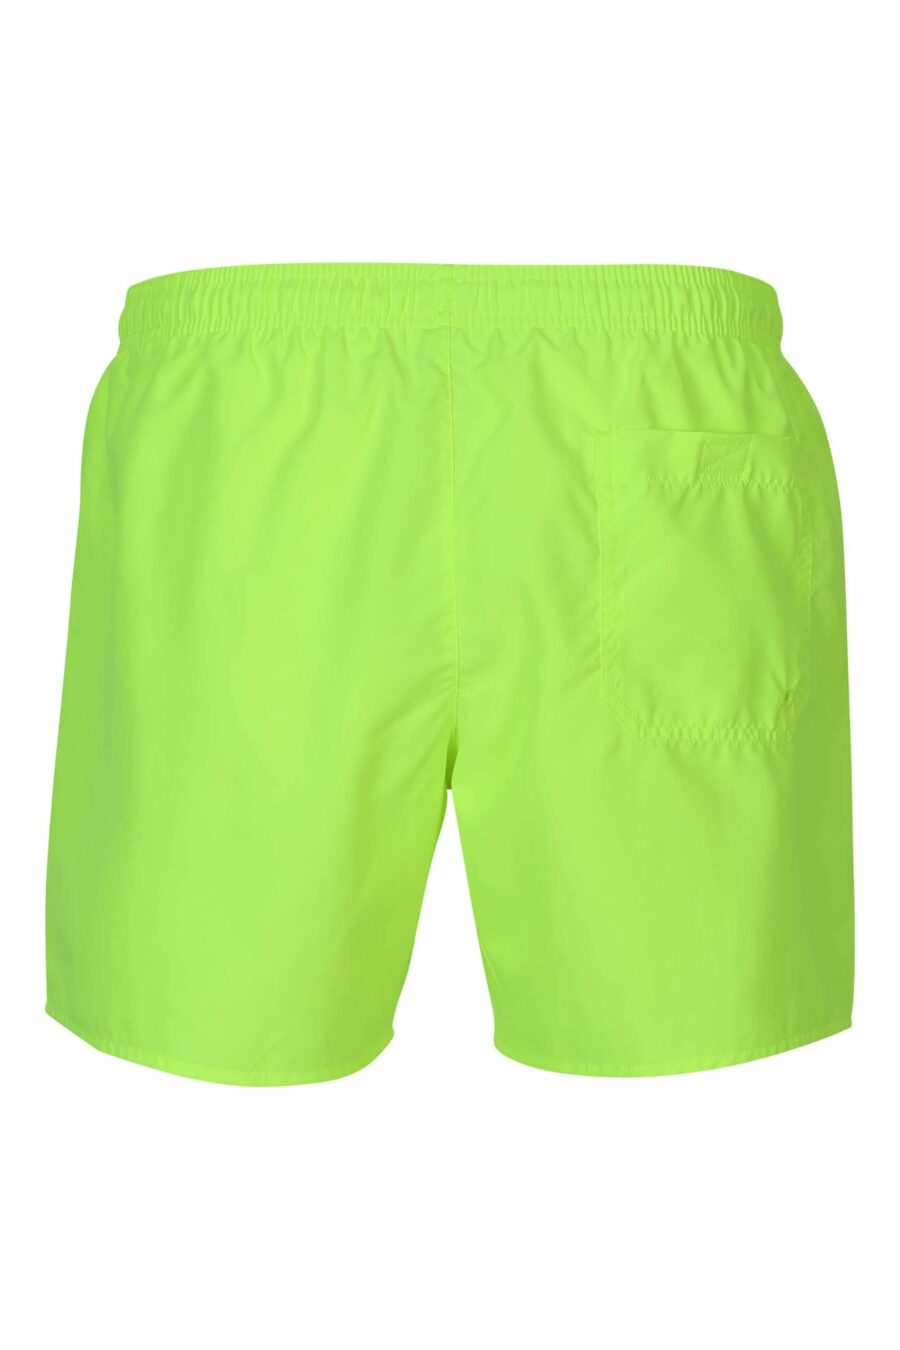 Neon green swimming costume with vertical side "lux identity" logo - 8059972905280 2 scaled